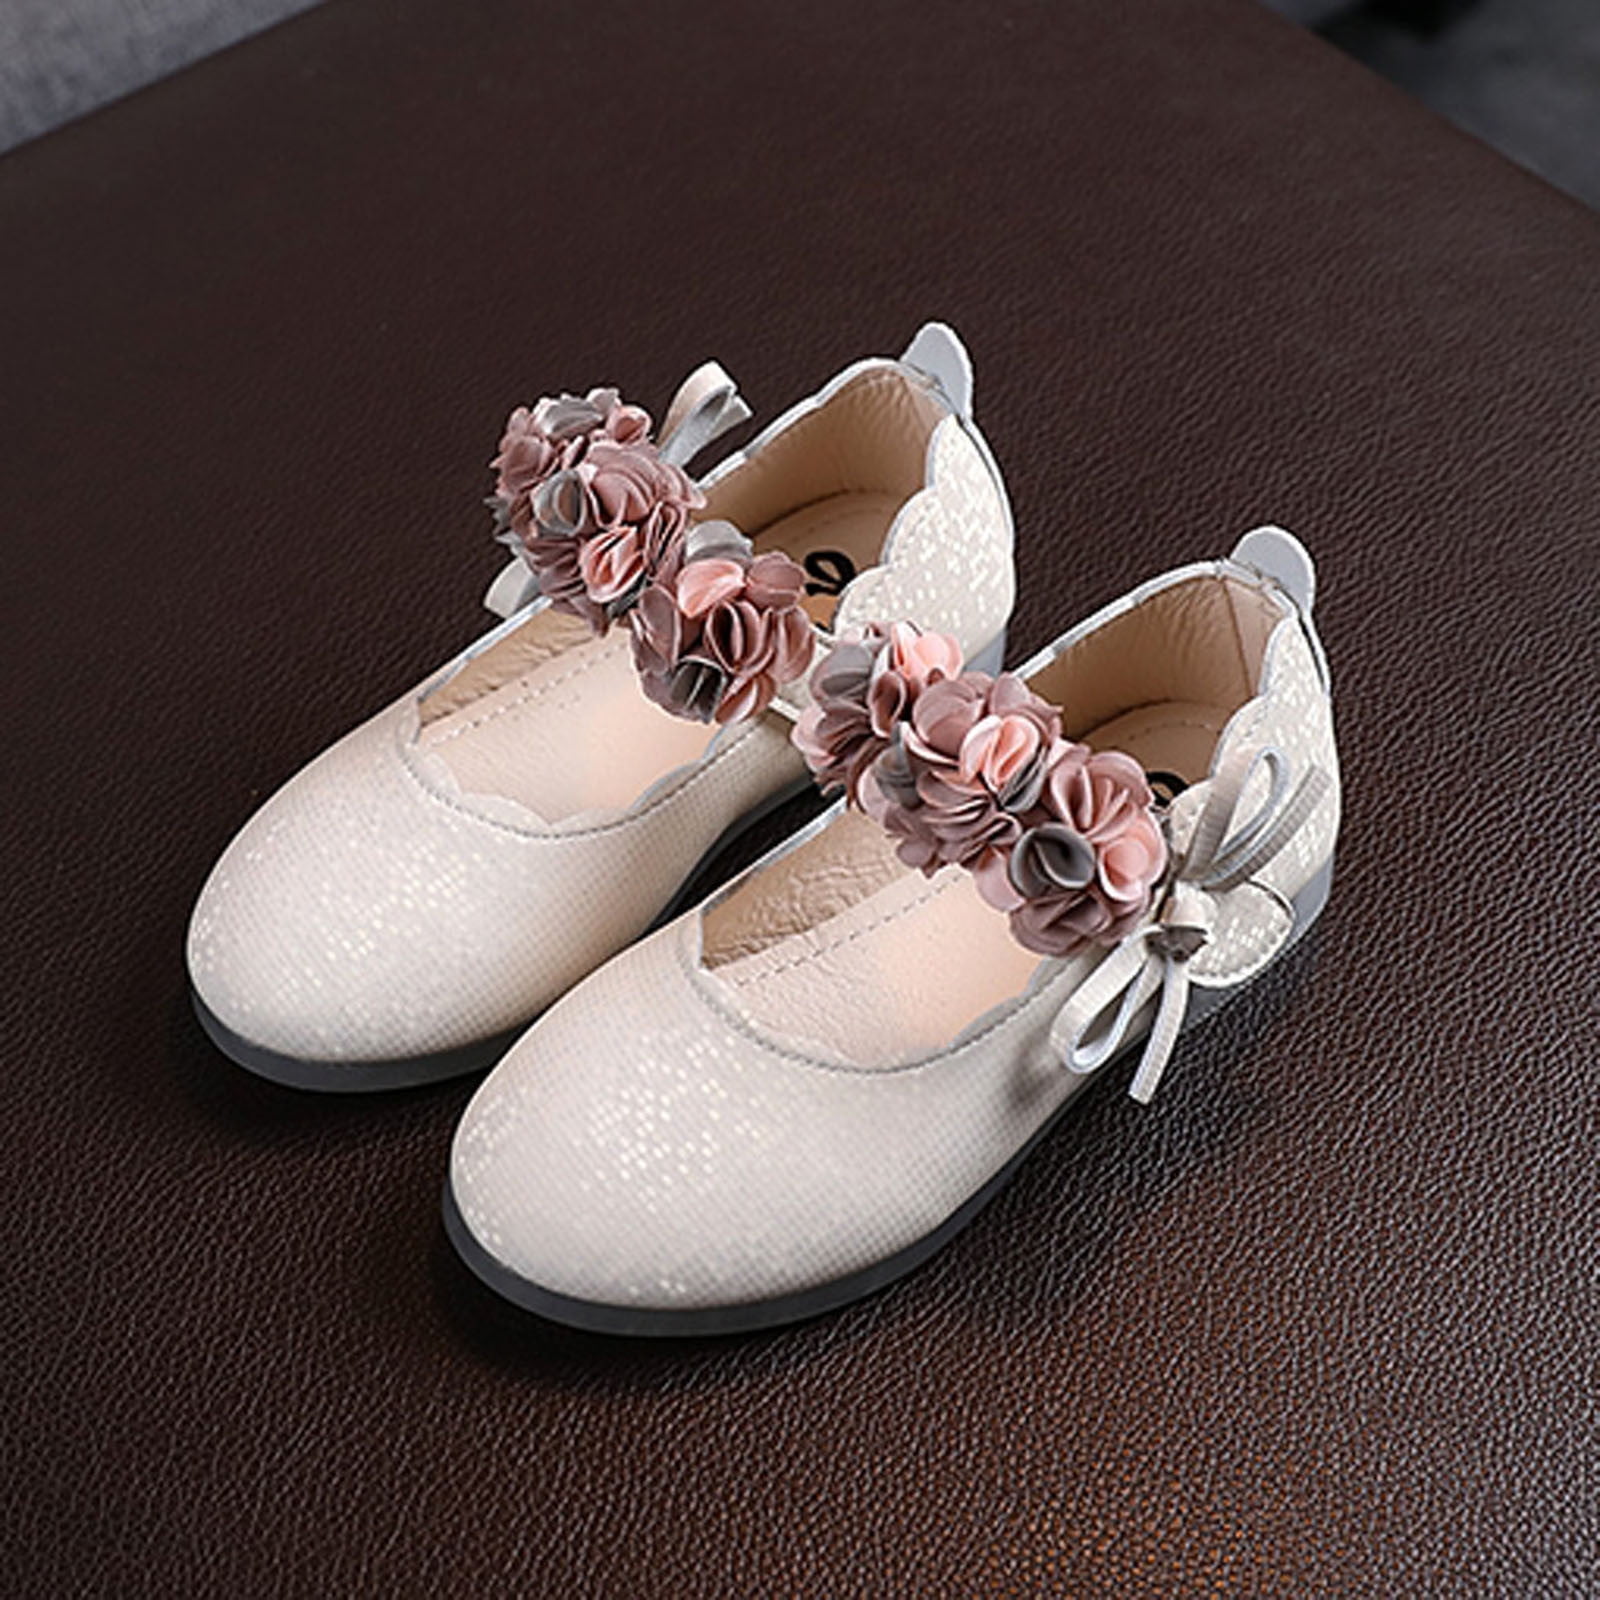 Lanhui Summer Kids Sandals Girls Flower Casual Leather Pricness Child Shoes 